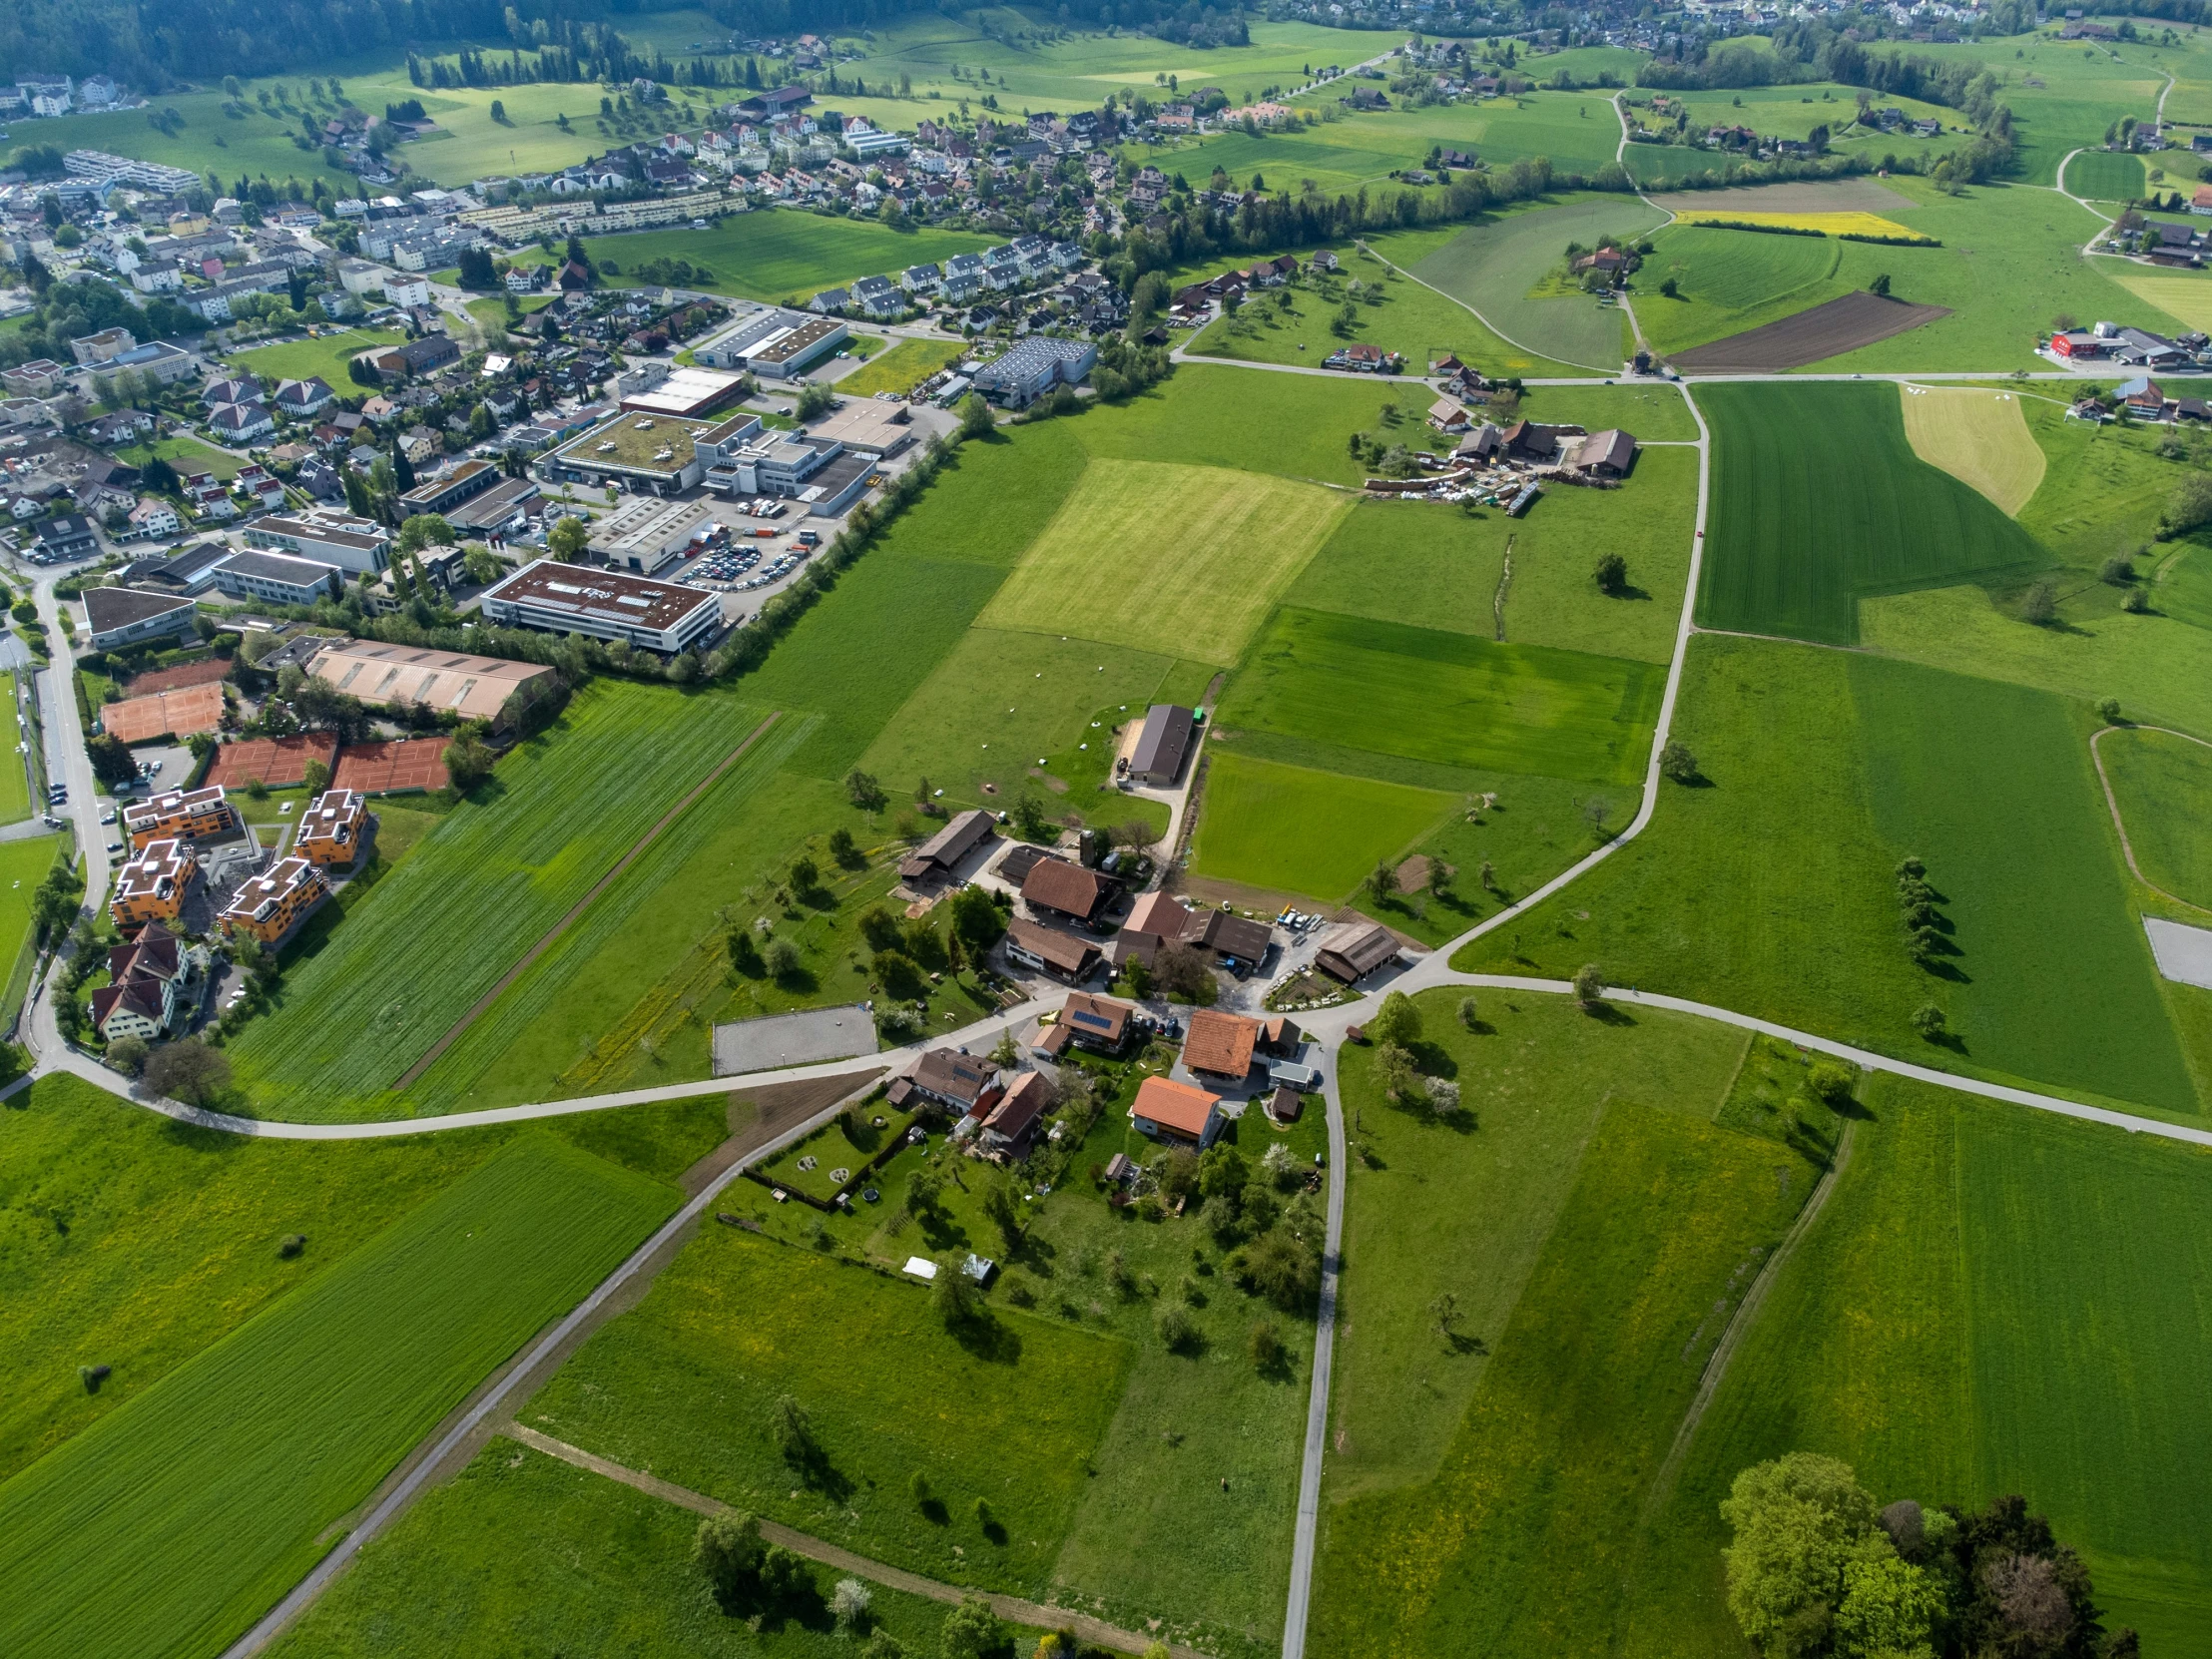 an aerial view of green land and large buildings